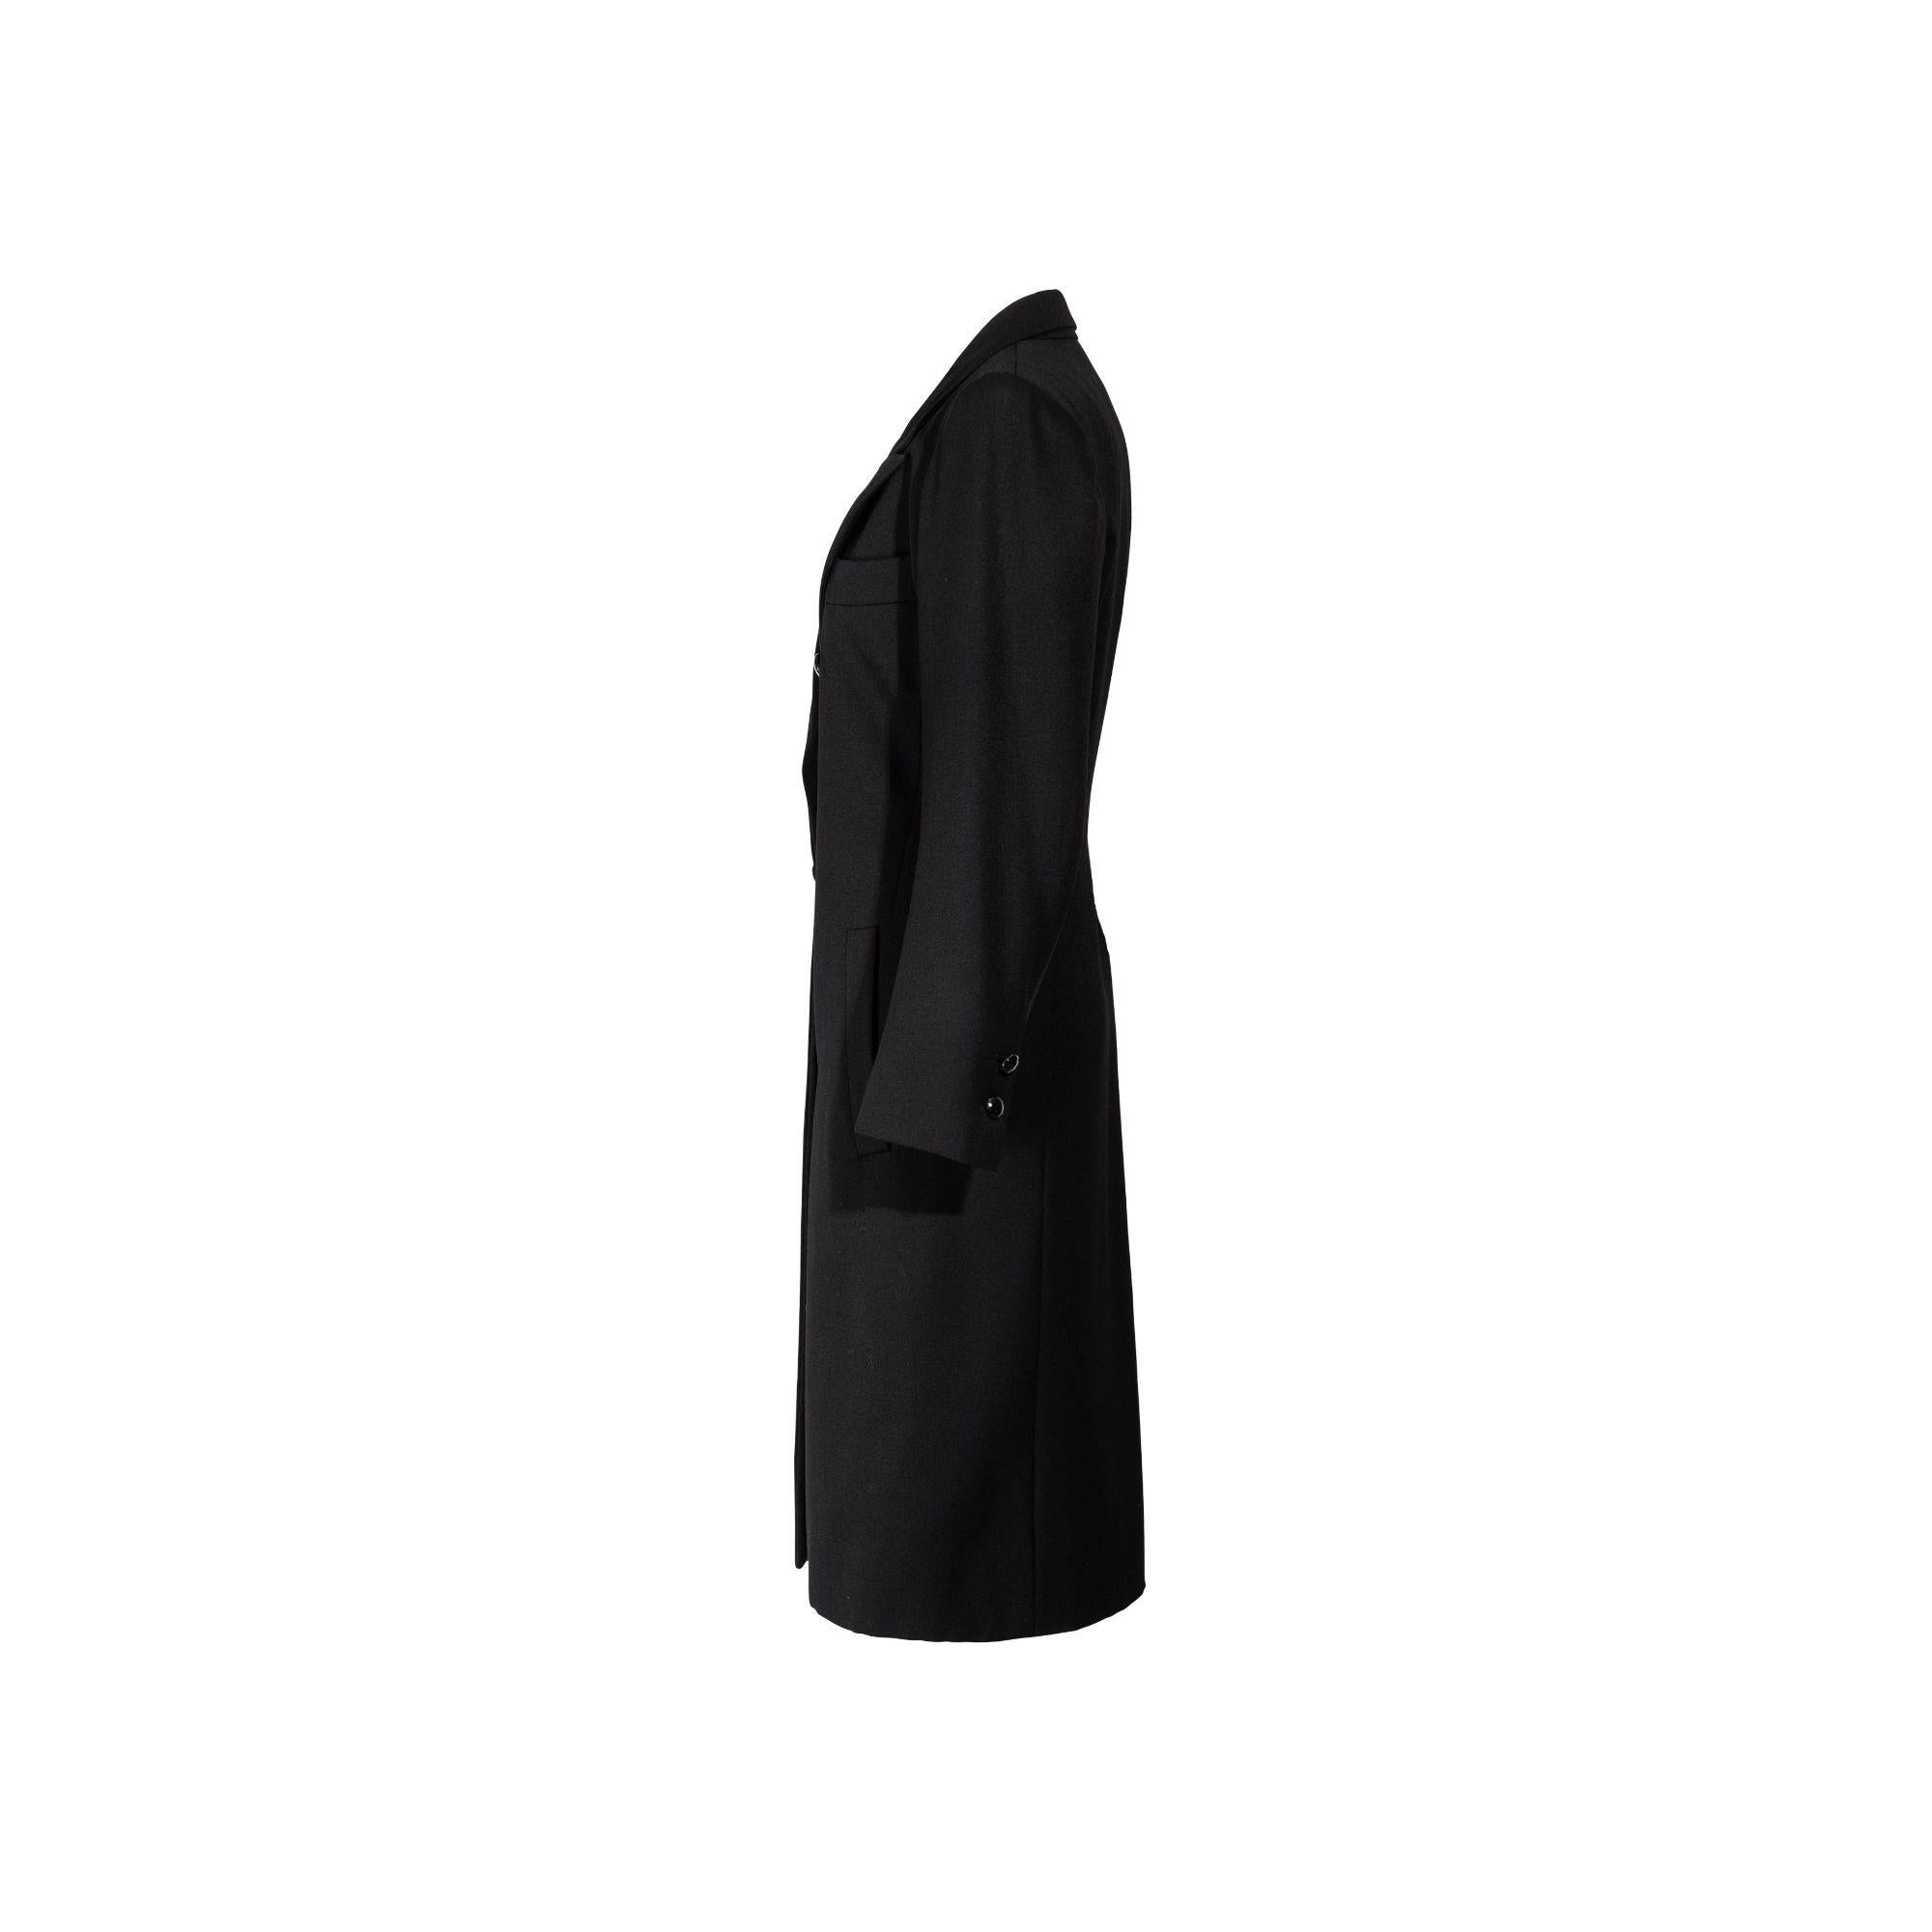 Yves Saint Laurent Rive Gauche Black Tuxedo Dress, 1983 In Excellent Condition In North Hollywood, CA